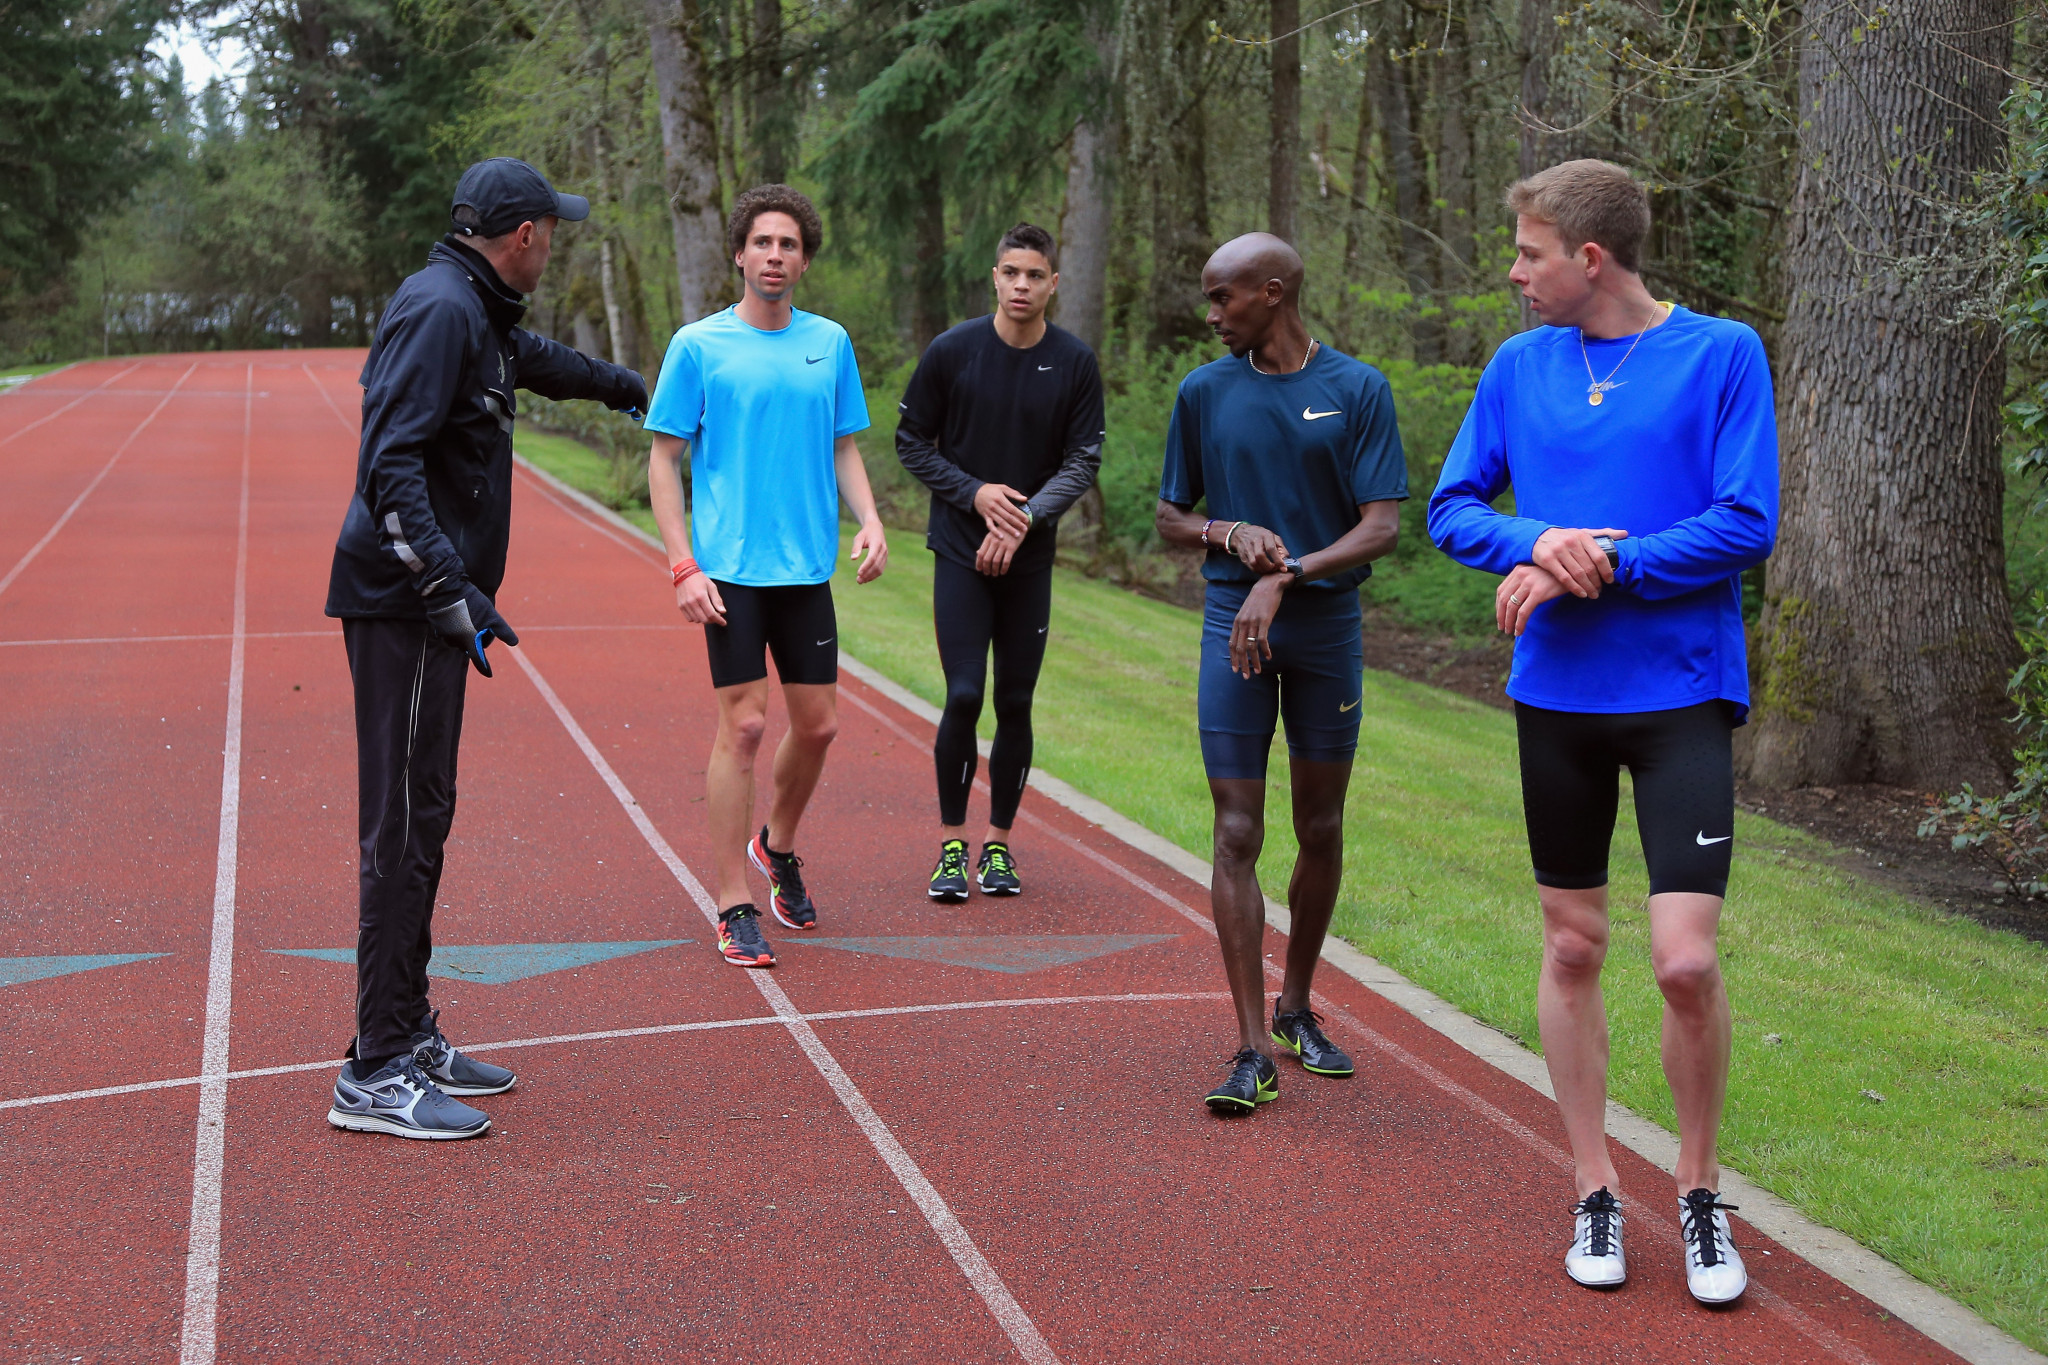 Alberto Salazar, far left, was supposed to take American long-distance running to new heights through the Nike Oregon Project, but instead it is now shuttered and the head coach banned for both doping and safe-sport violations ©Getty Images